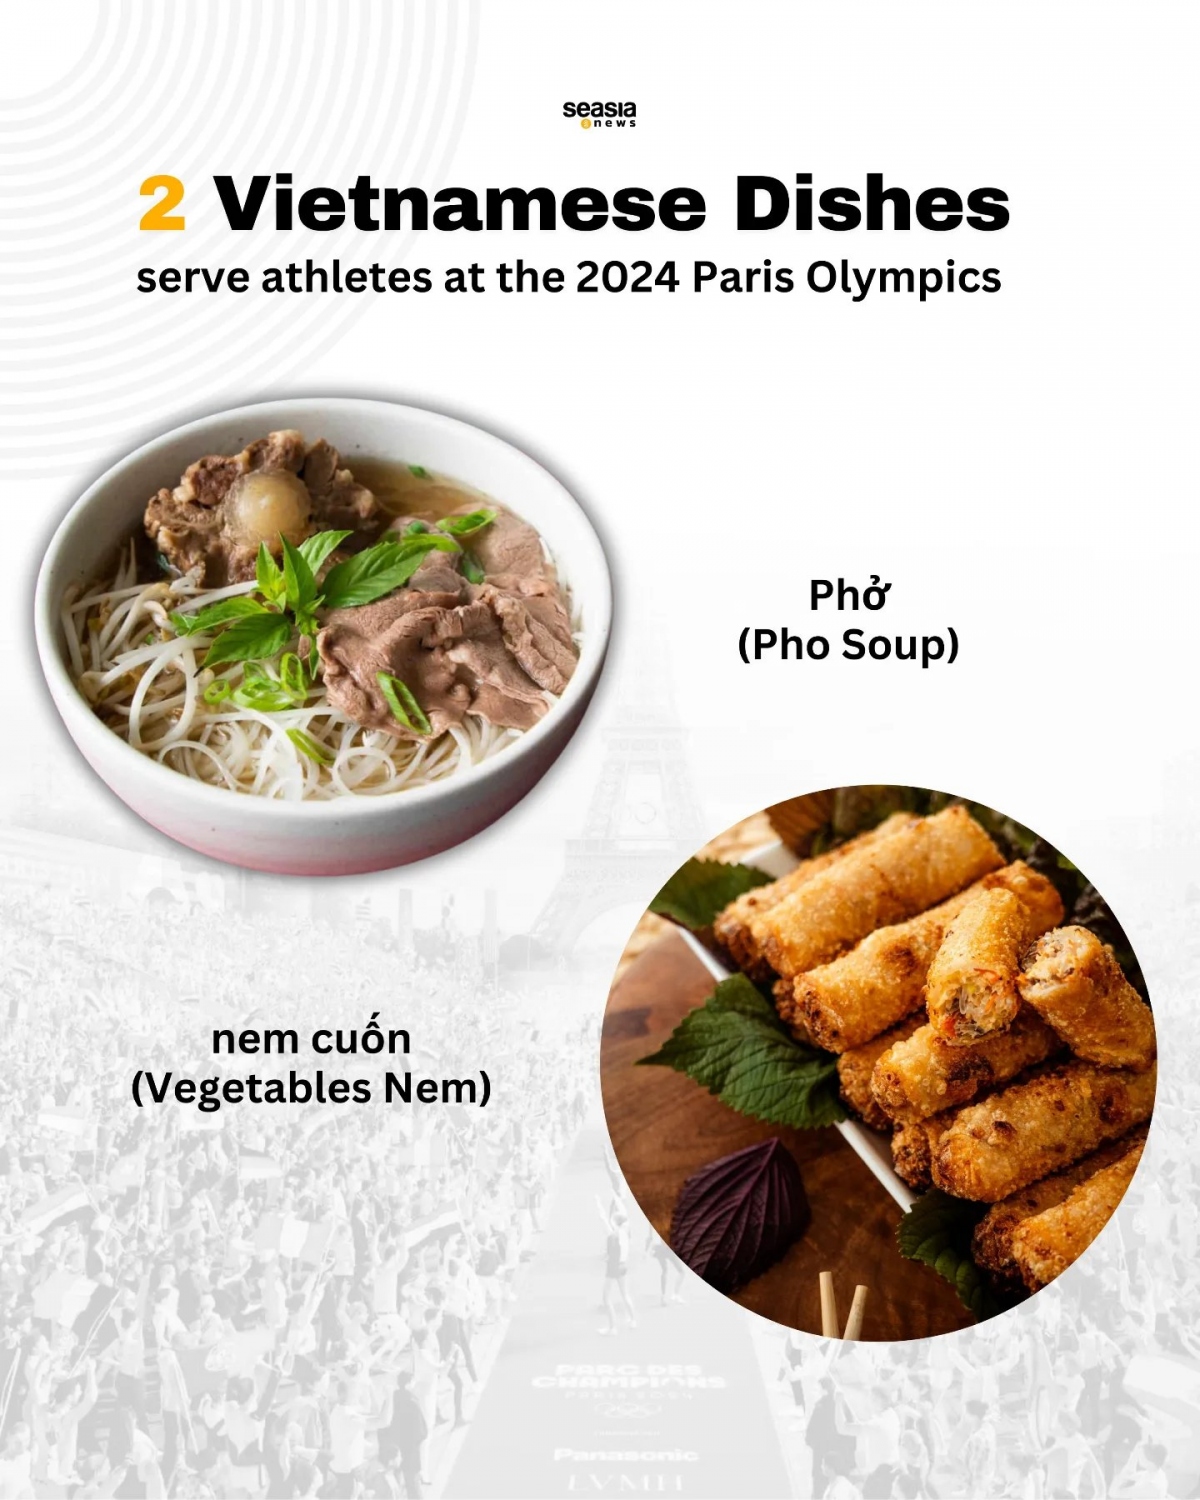 two vietnamese dishes selected to serve athletes at 2024 paris olympics picture 1